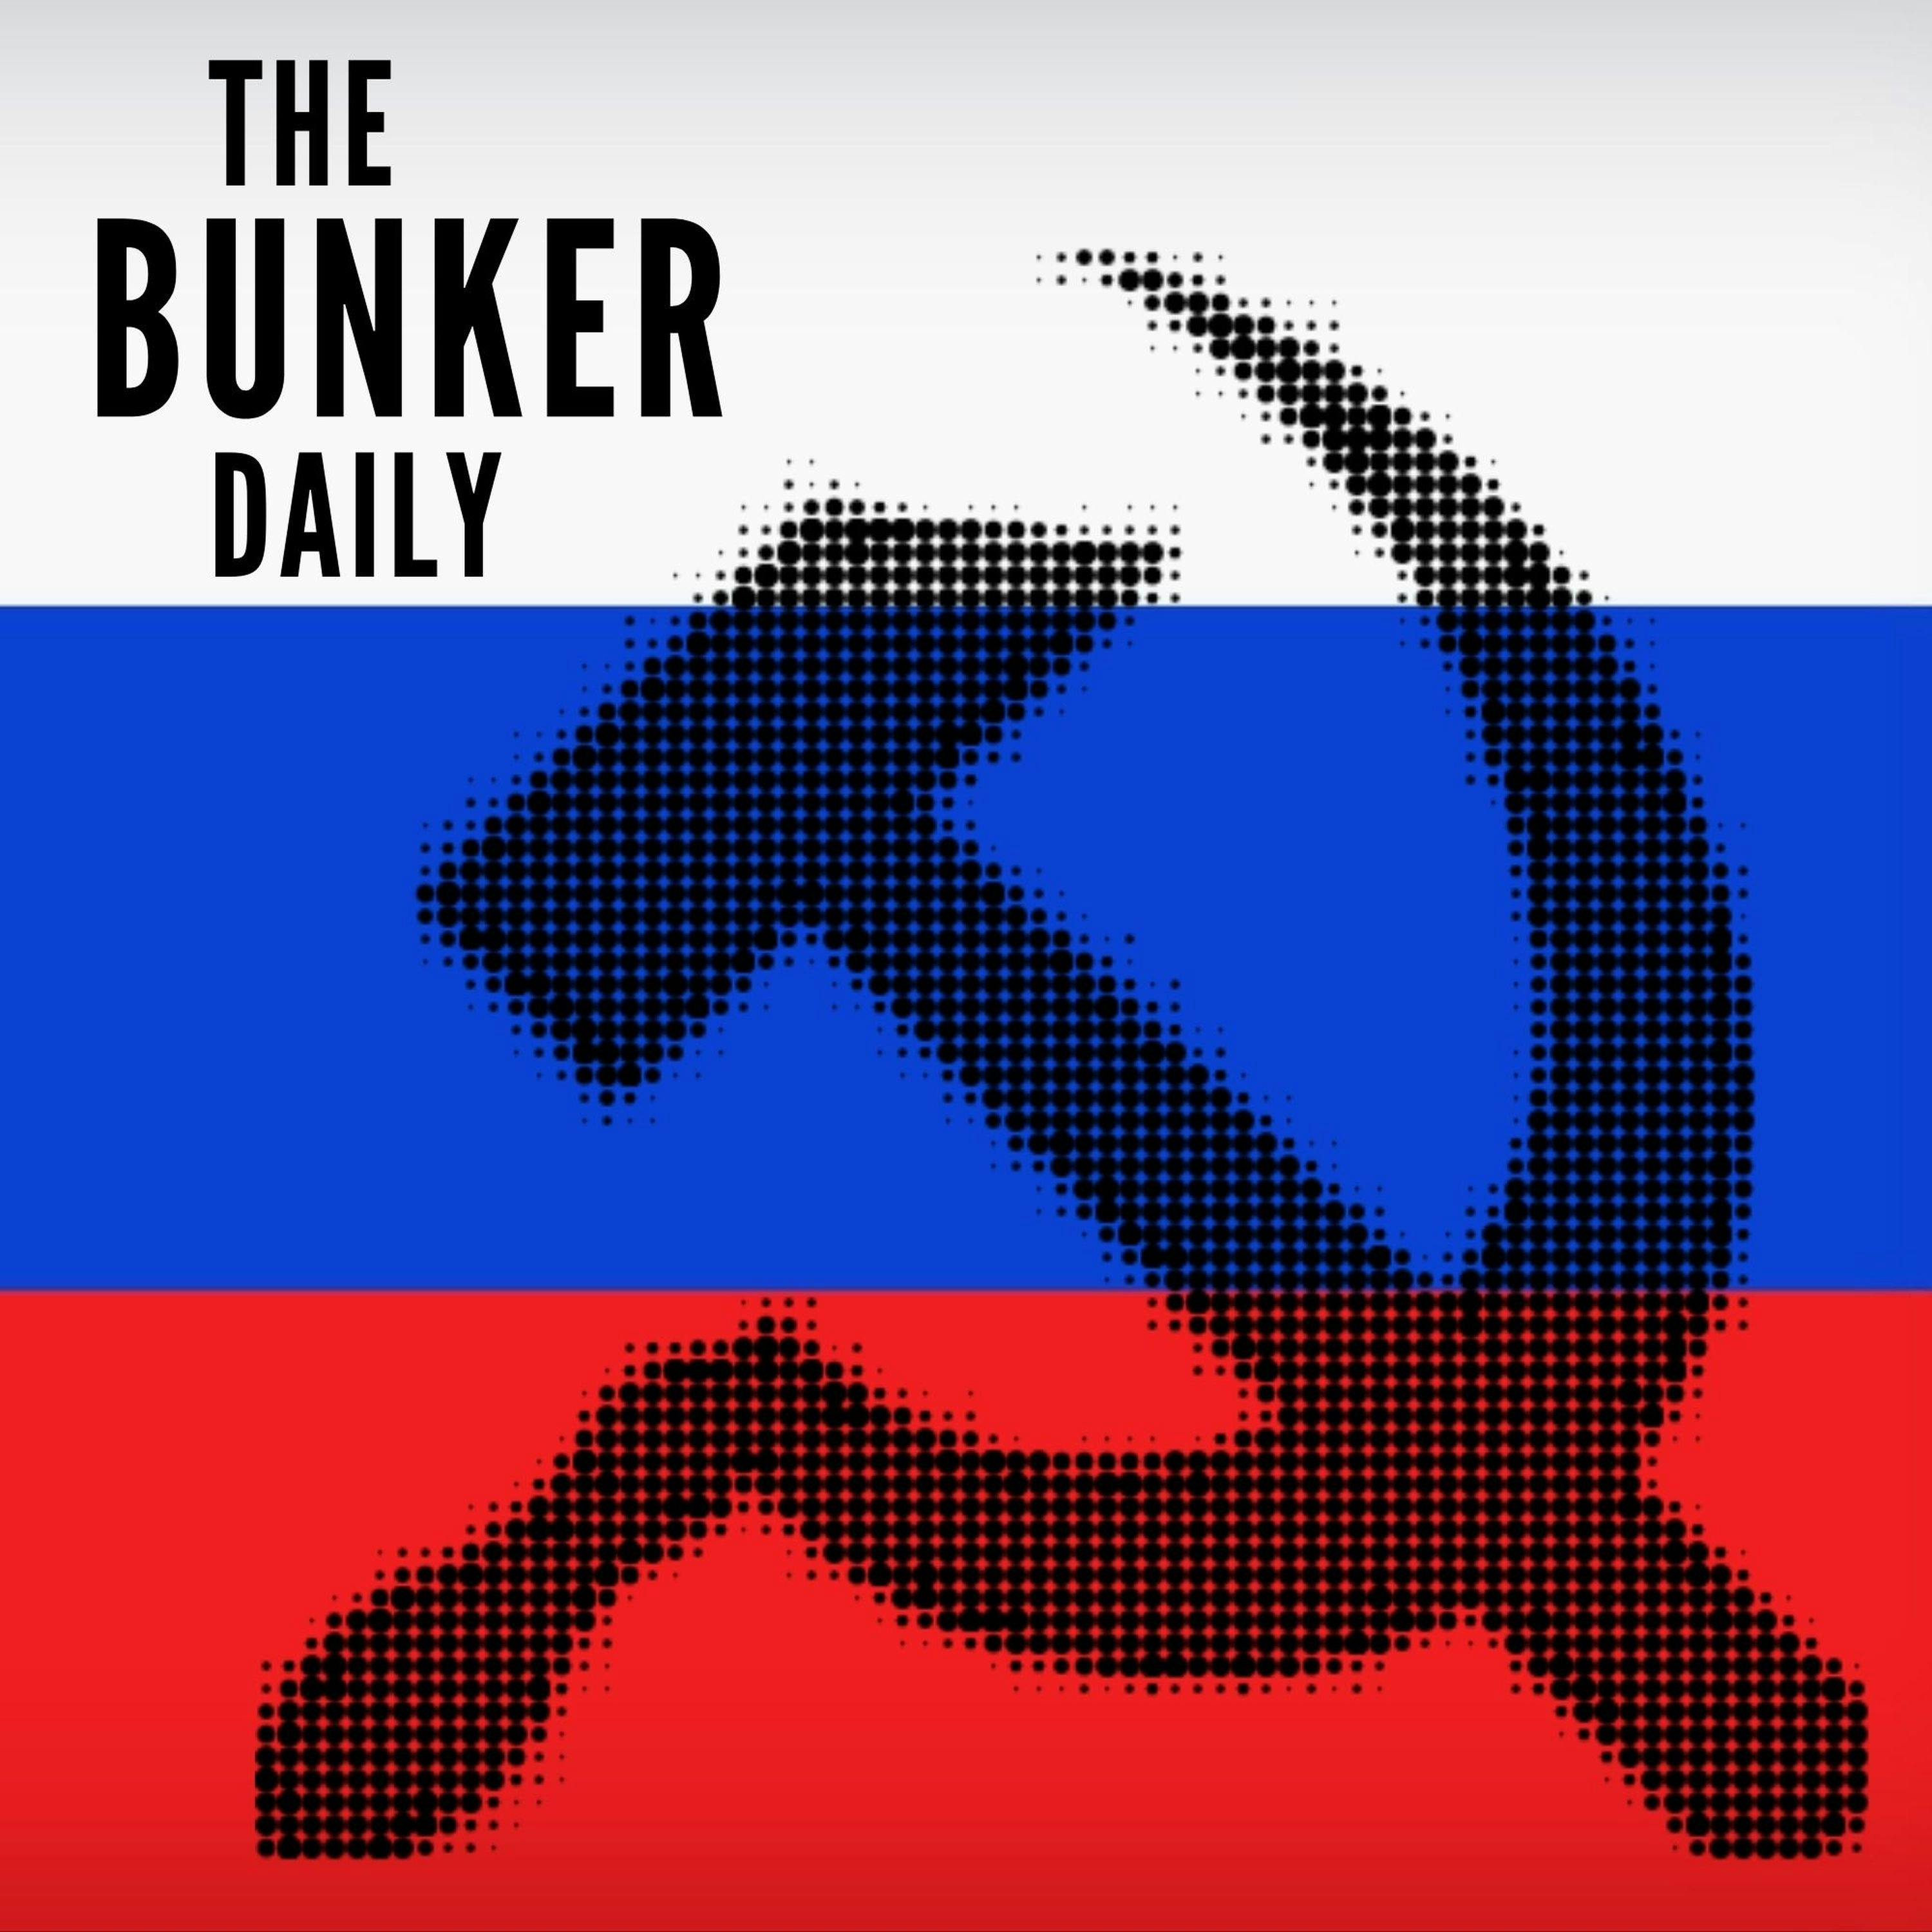 Daily: BACK IN THE USSR? Author Sergei Lebedev on Russia’s unquiet past